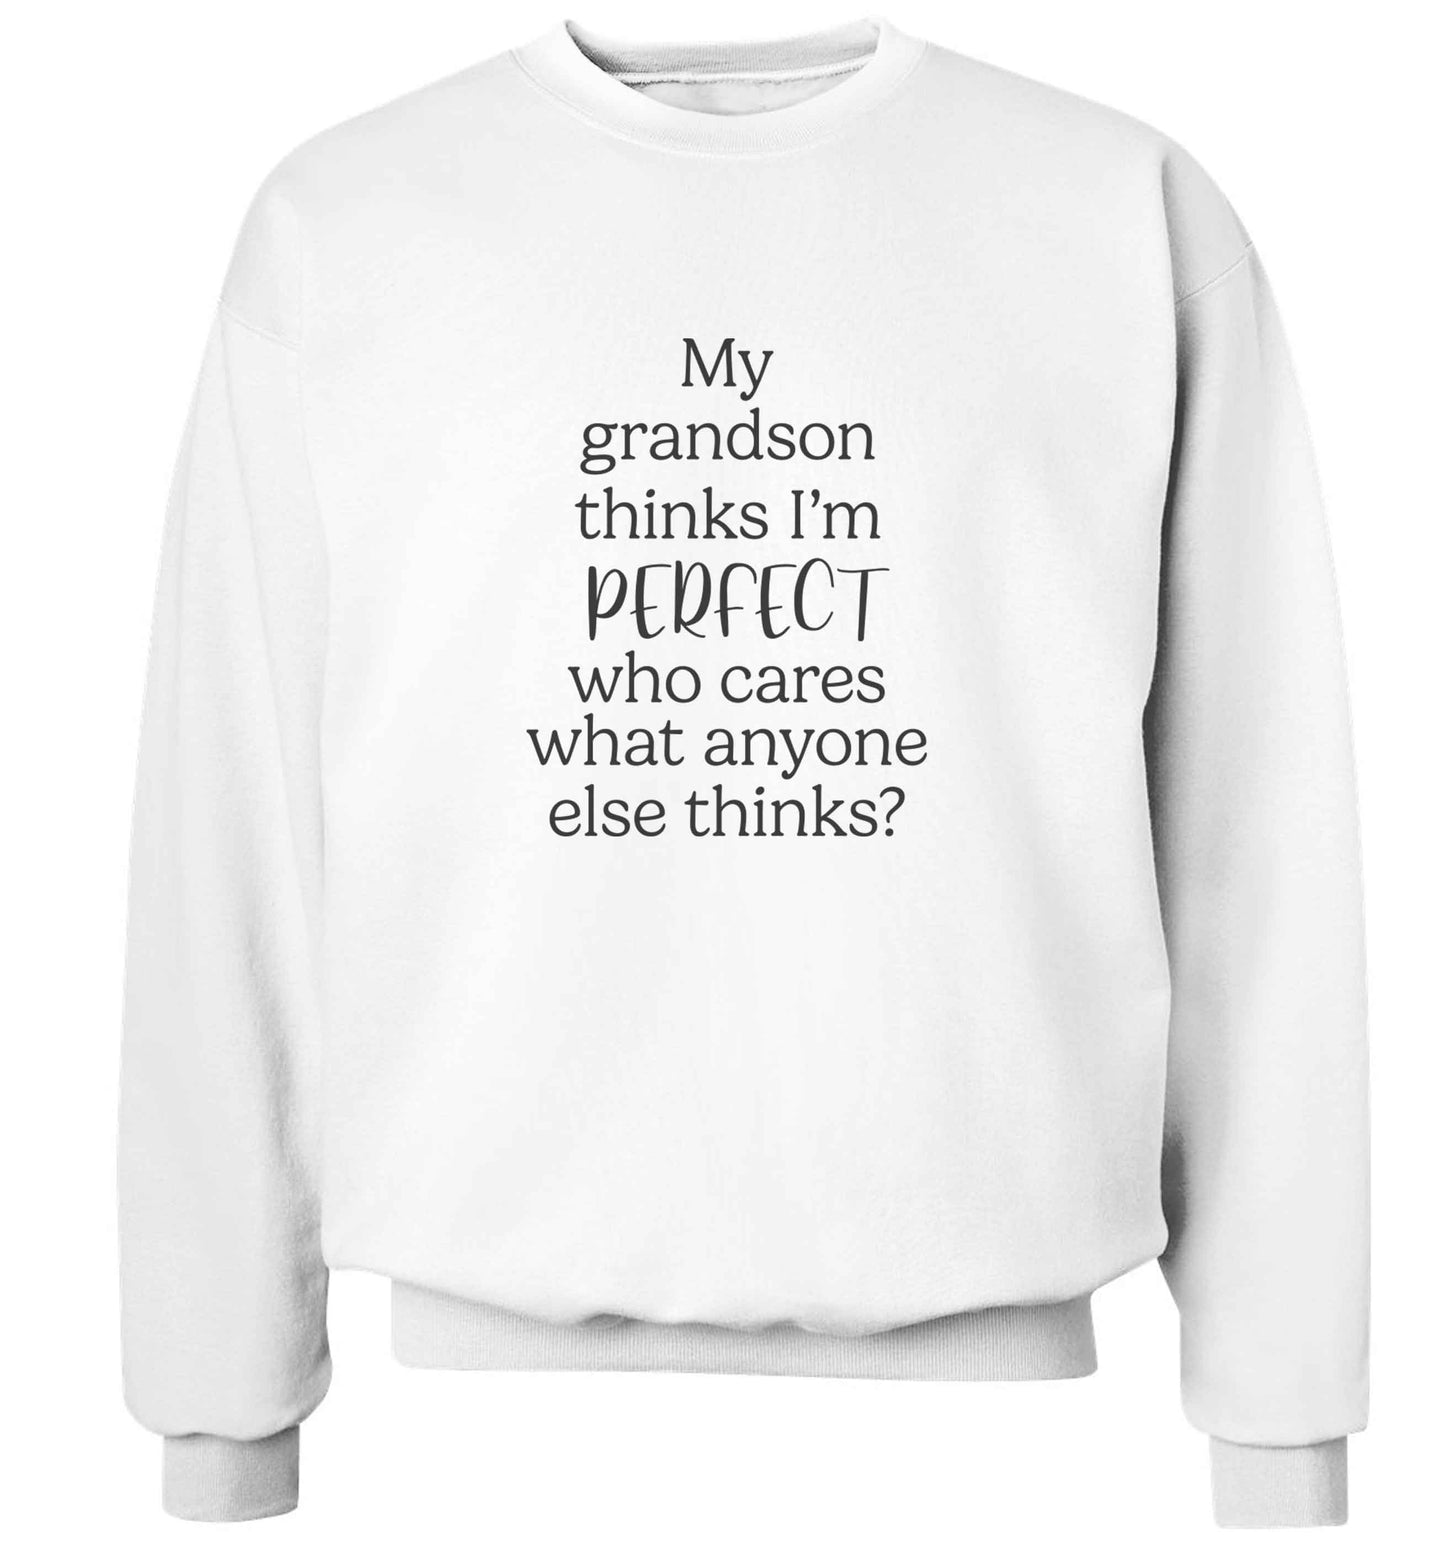 My Grandson thinks I'm perfect who cares what anyone else thinks? adult's unisex white sweater 2XL